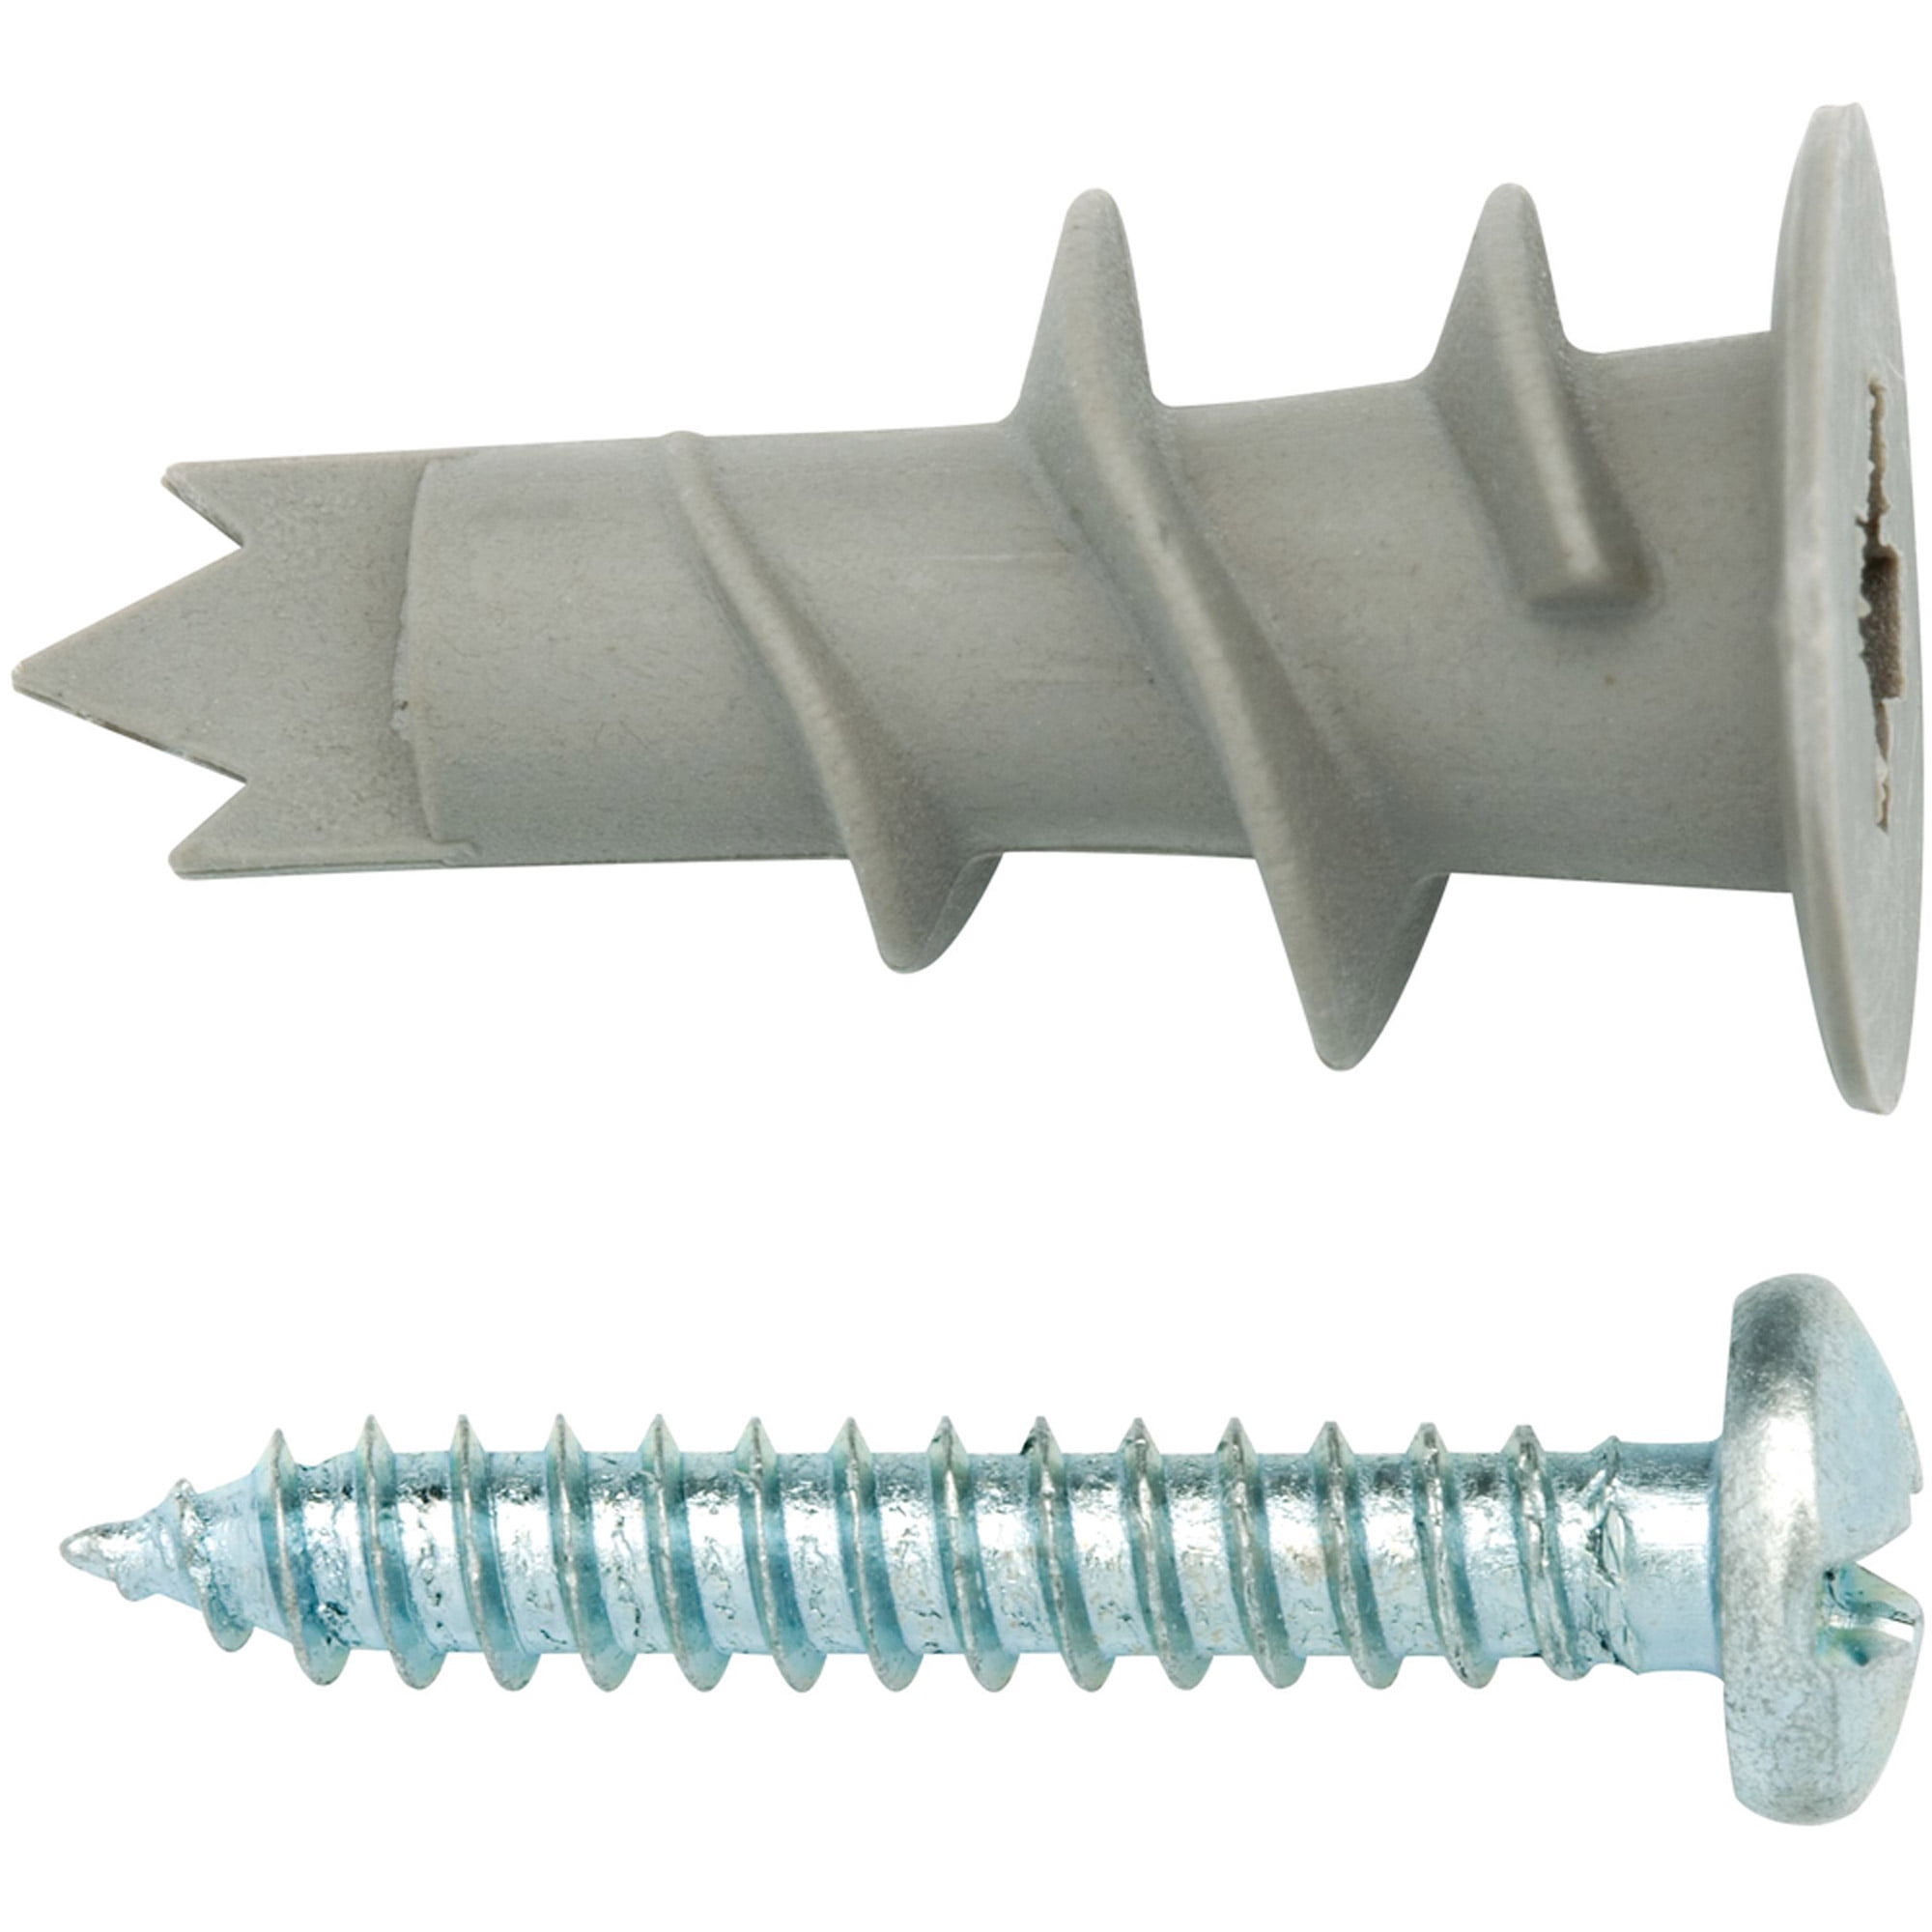 fasteners and anchors